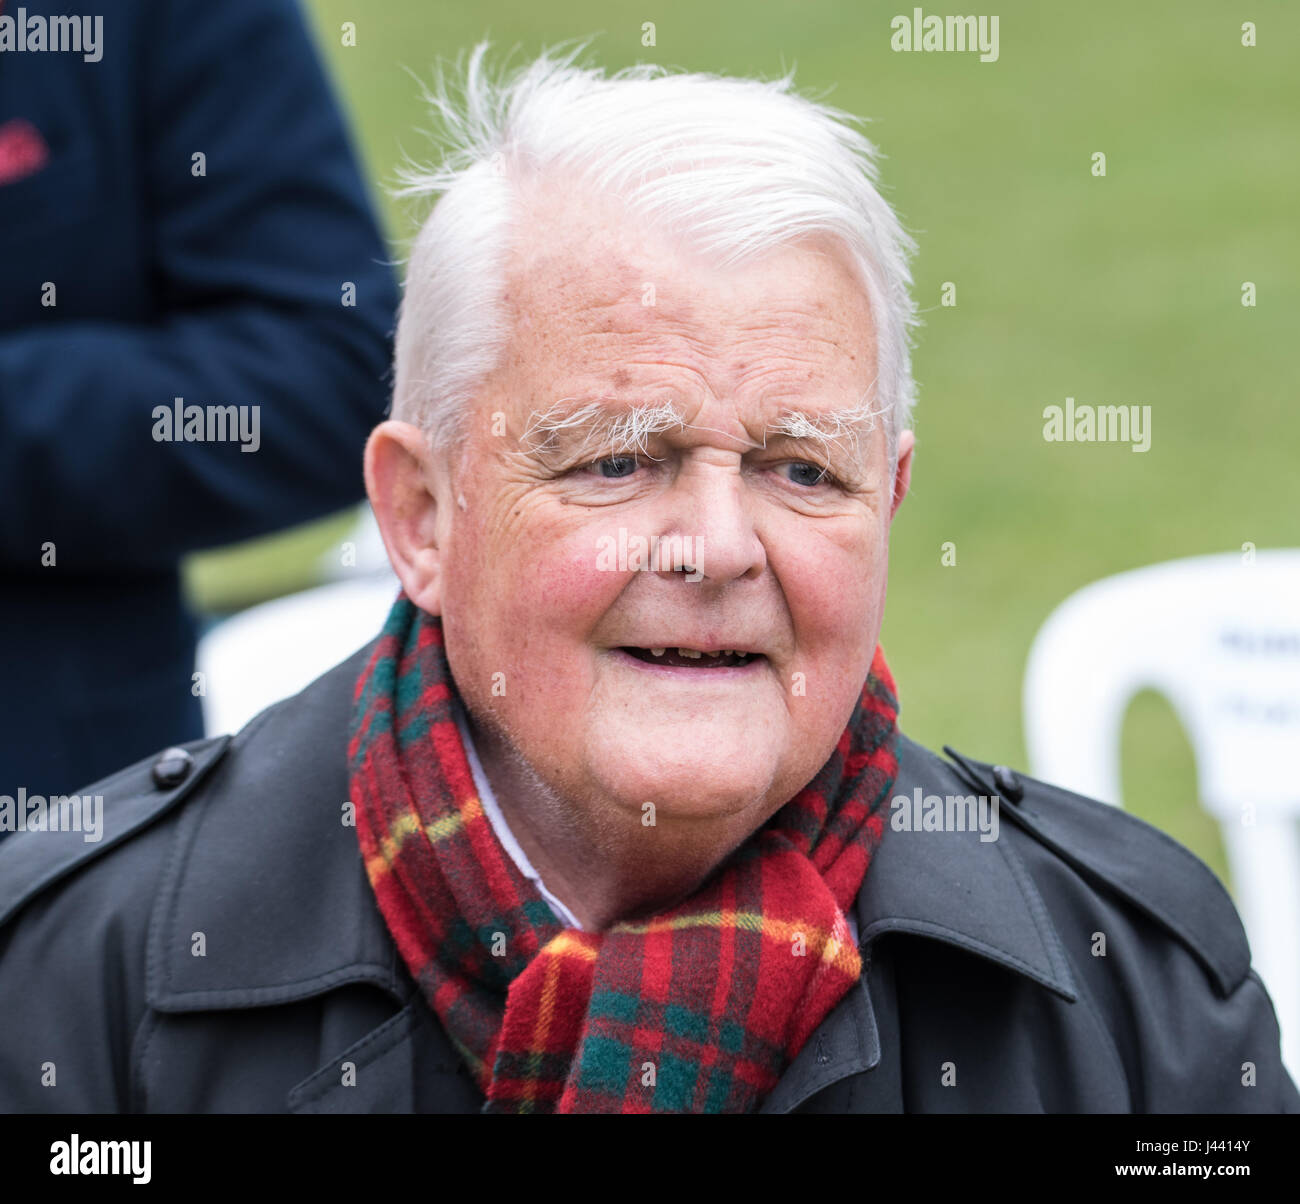 London, 9th May 2017, Bruce Kent, Vice President of the Campaign for Nuclear Disarmament, at the Soviet Memorial London, Act of Remembrance marking 72nd anniversary of the allied victory over Fascism Credit: Ian Davidson/Alamy Live News Stock Photo